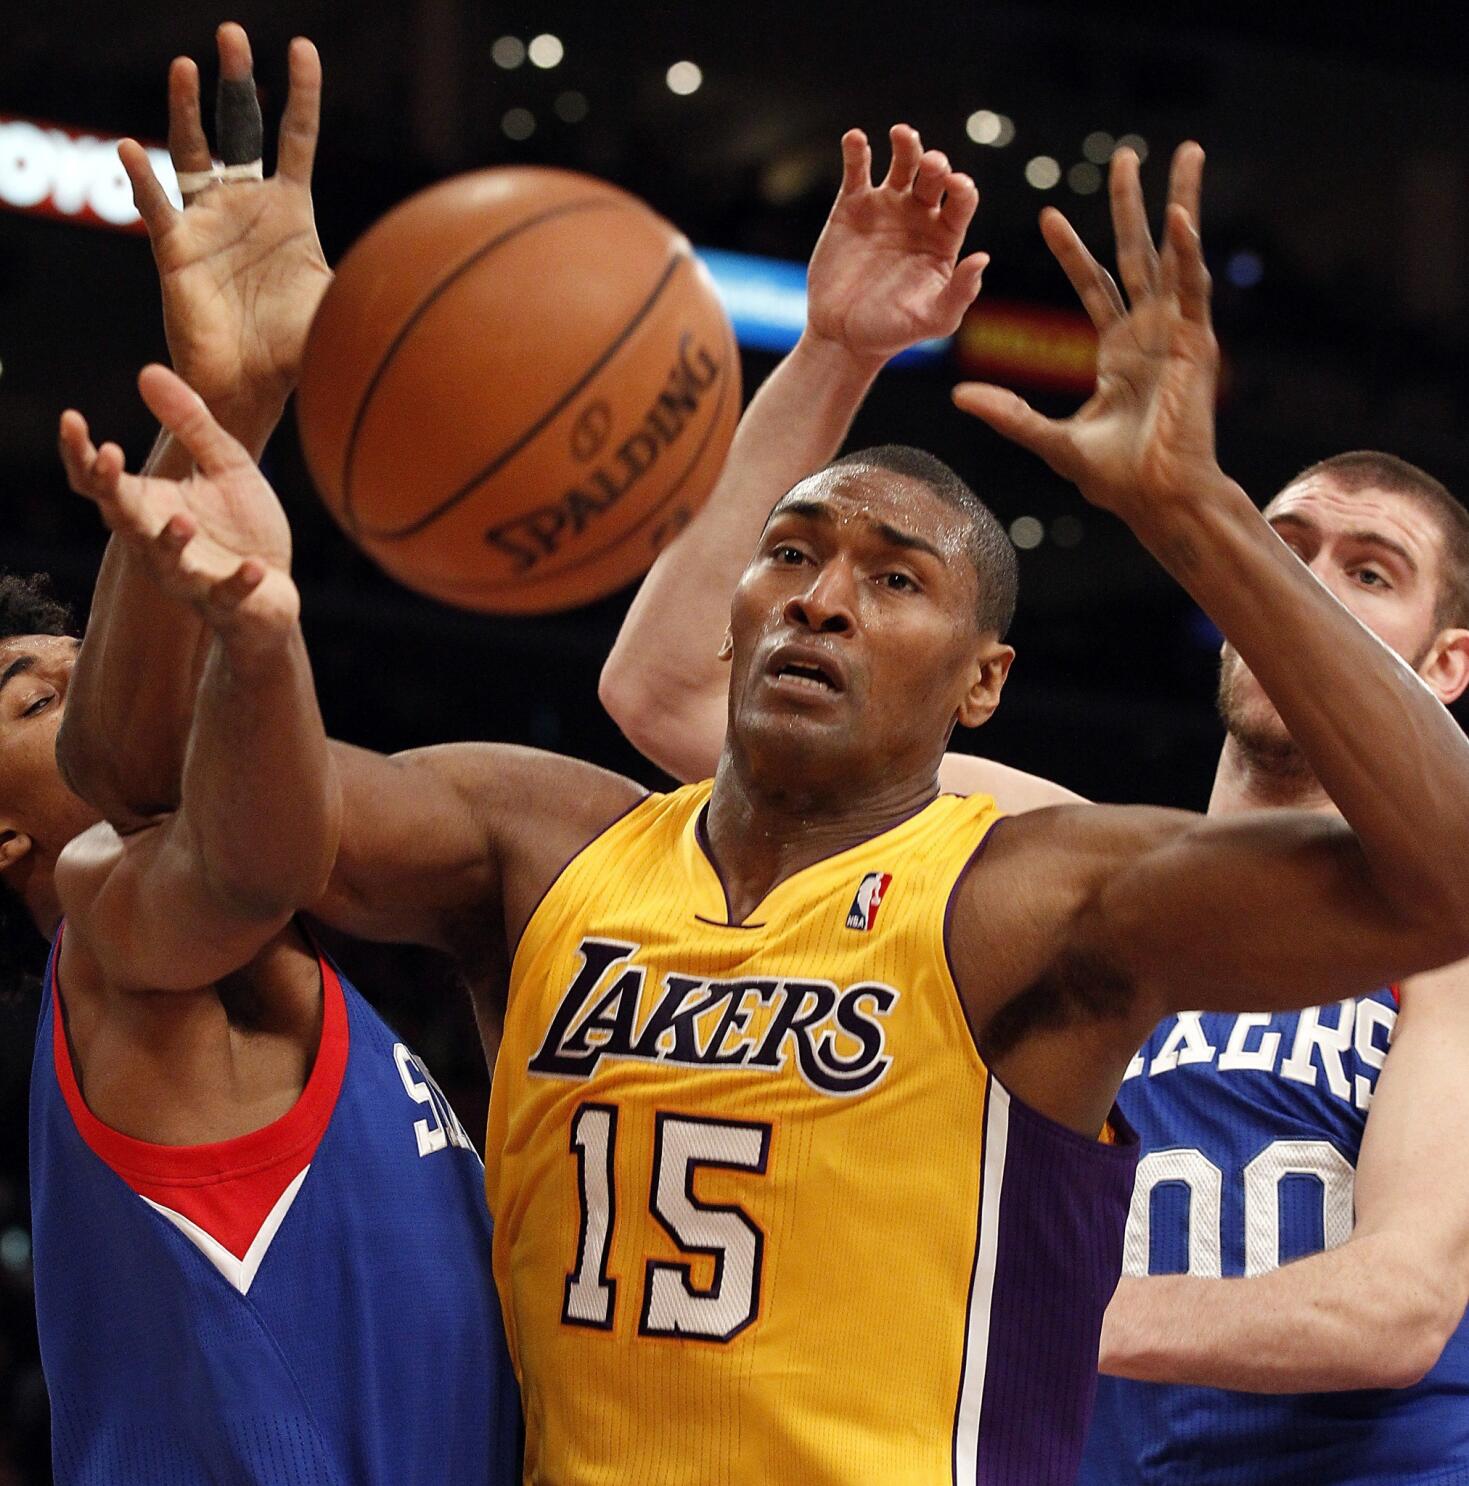 Video: What will the Knicks call Metta World Peace? - Posting and